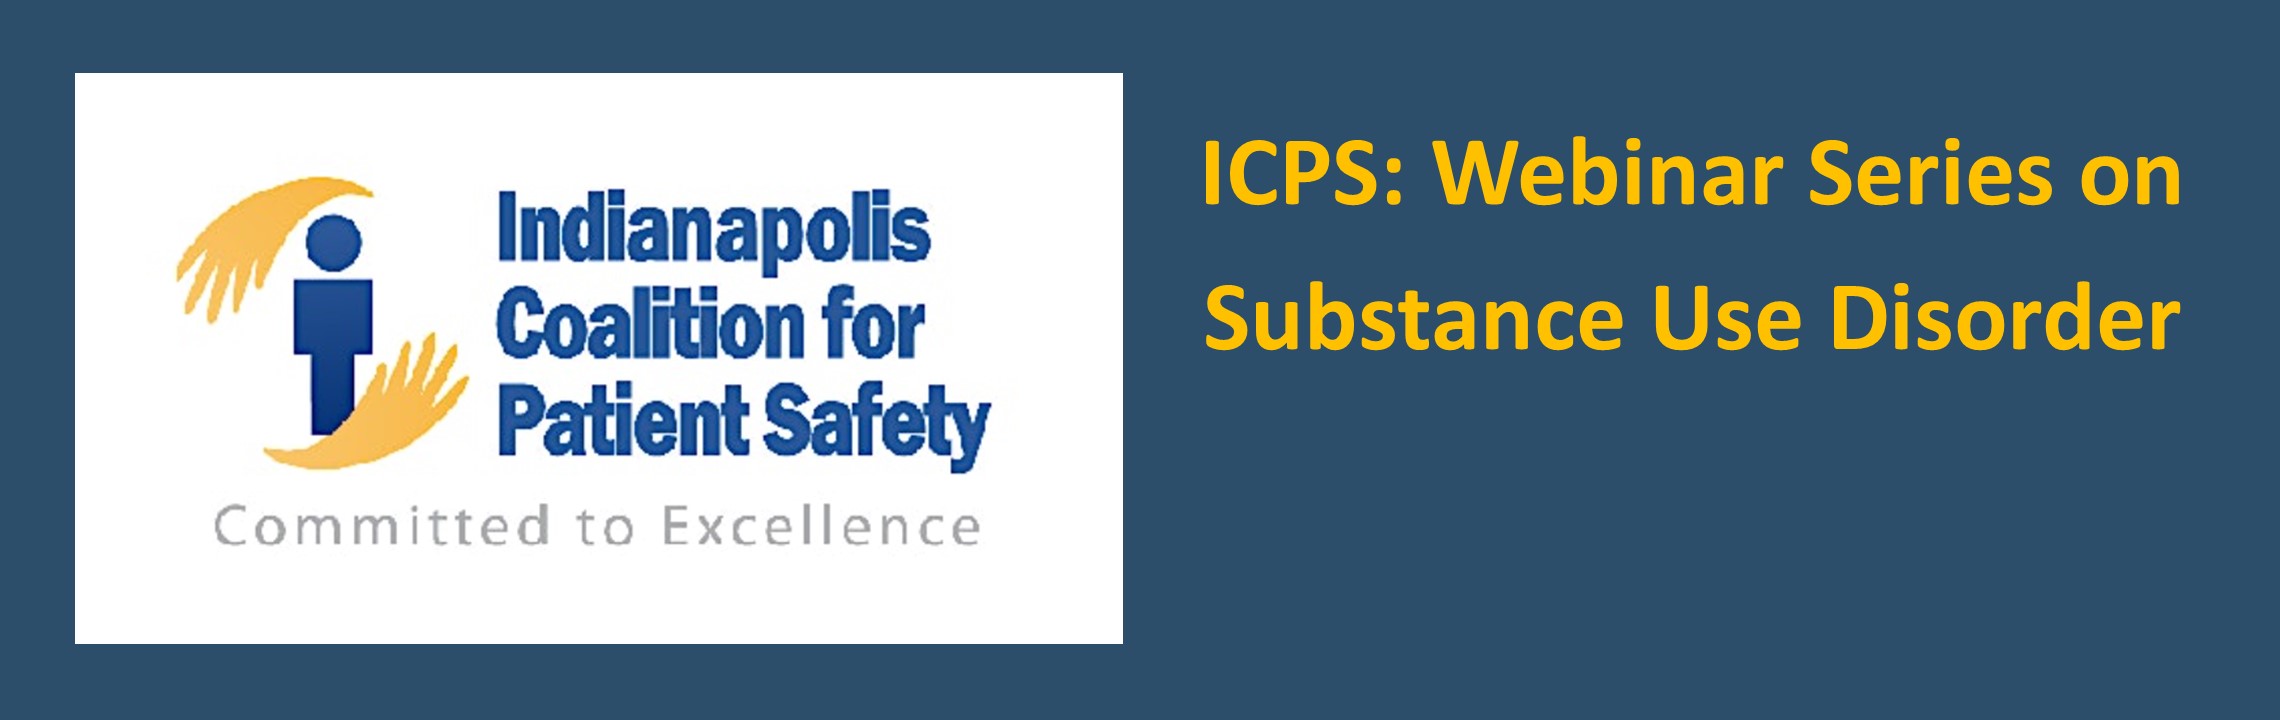 ICPS: Webinar Series on Substance Use Disorder Banner